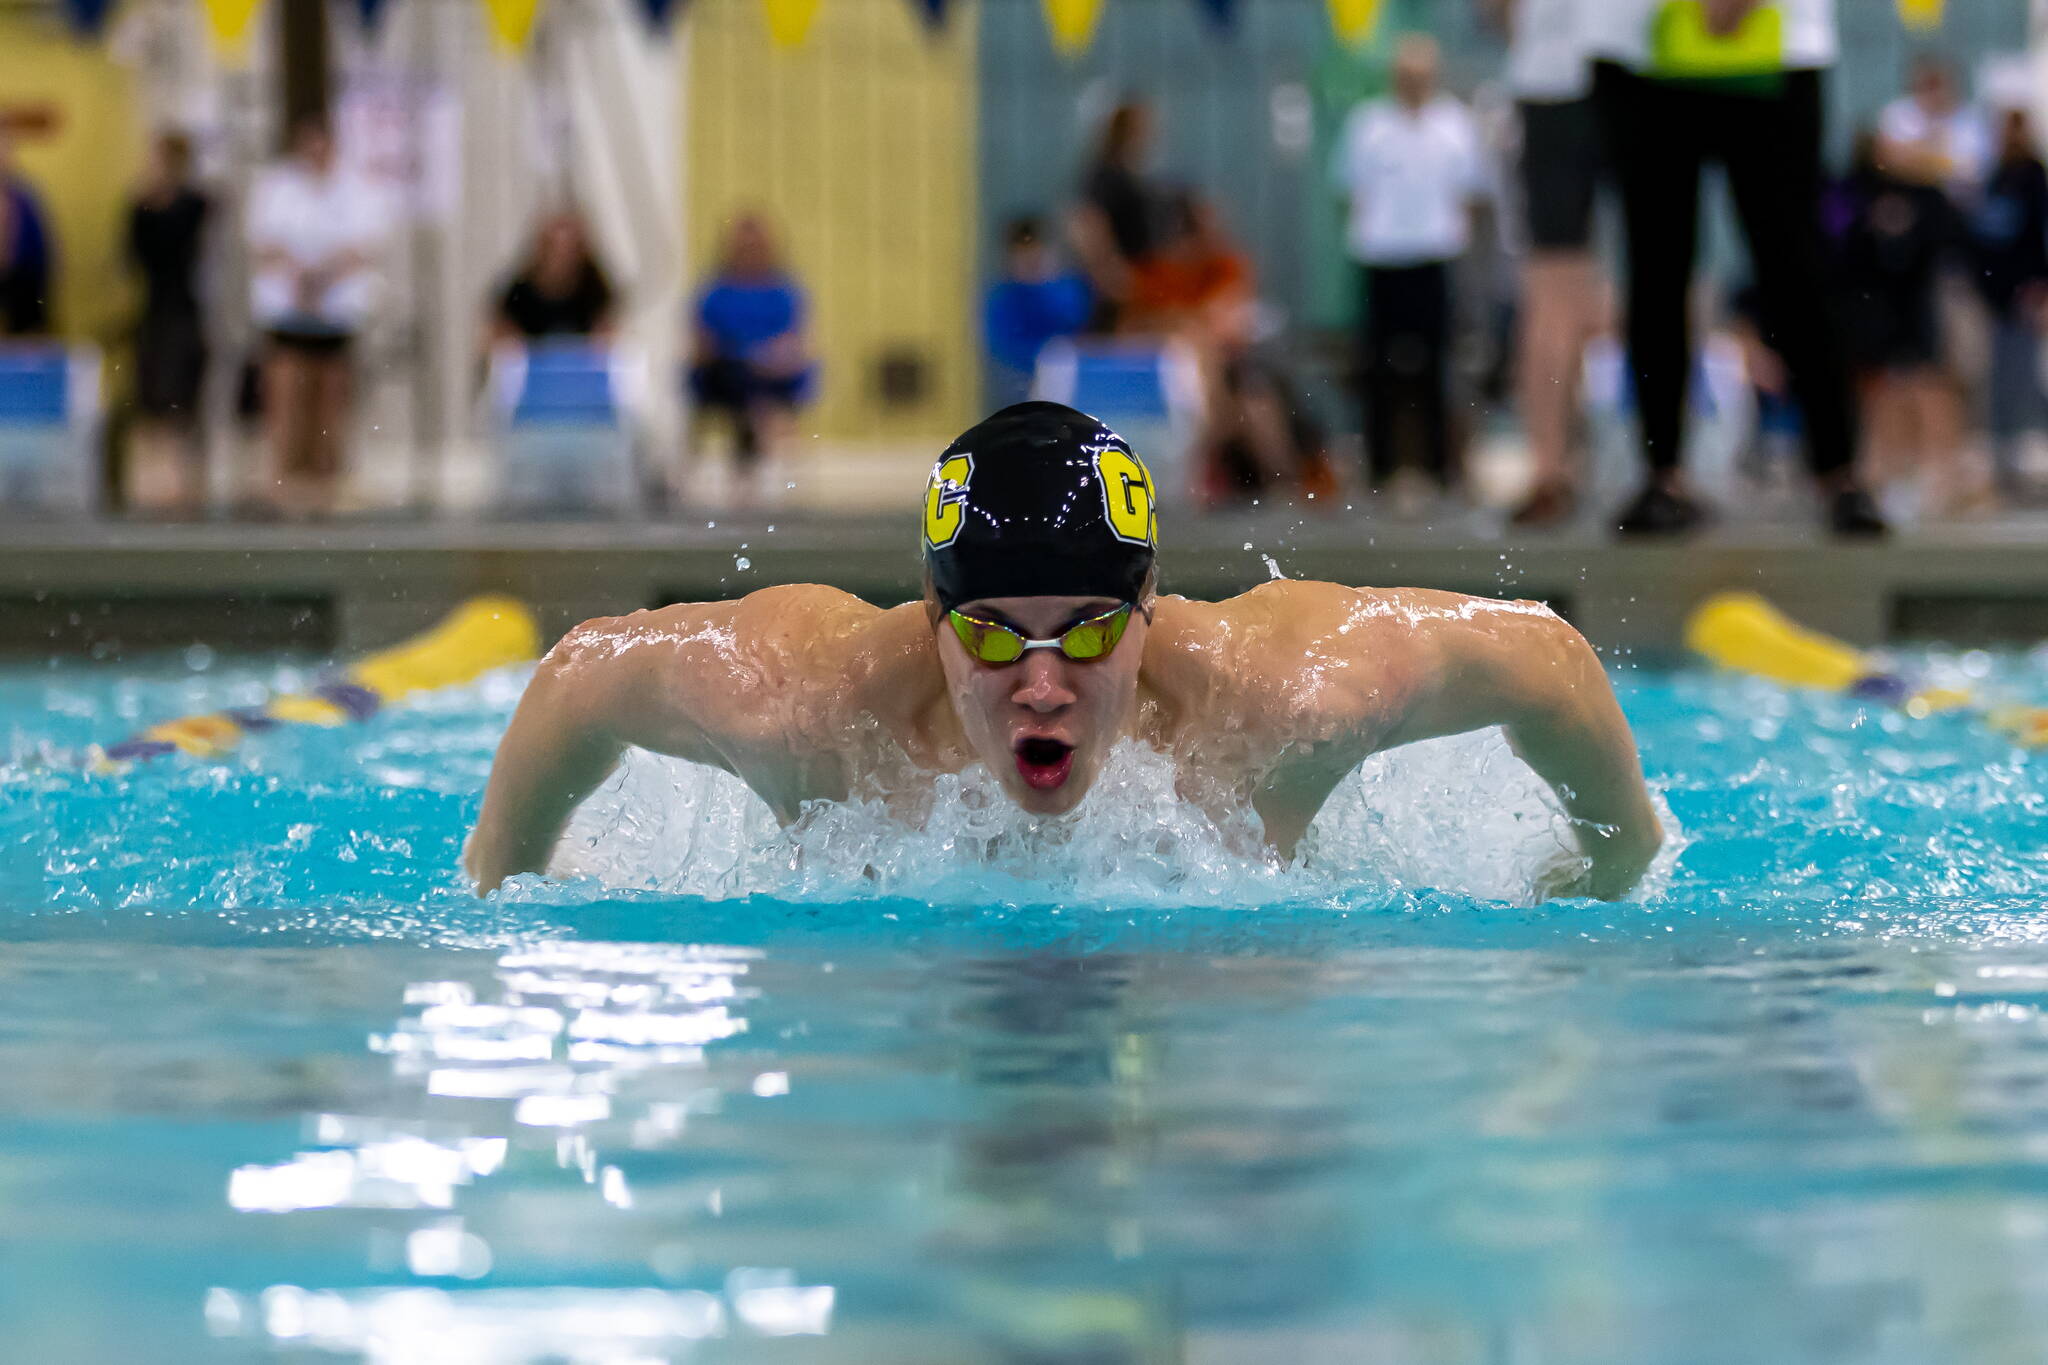 PJ Foy swims the butterfly at  the Speedo Winter Junior Championships in Westmont, Illinois. (Kevin Tuning / Forever Still Photography)